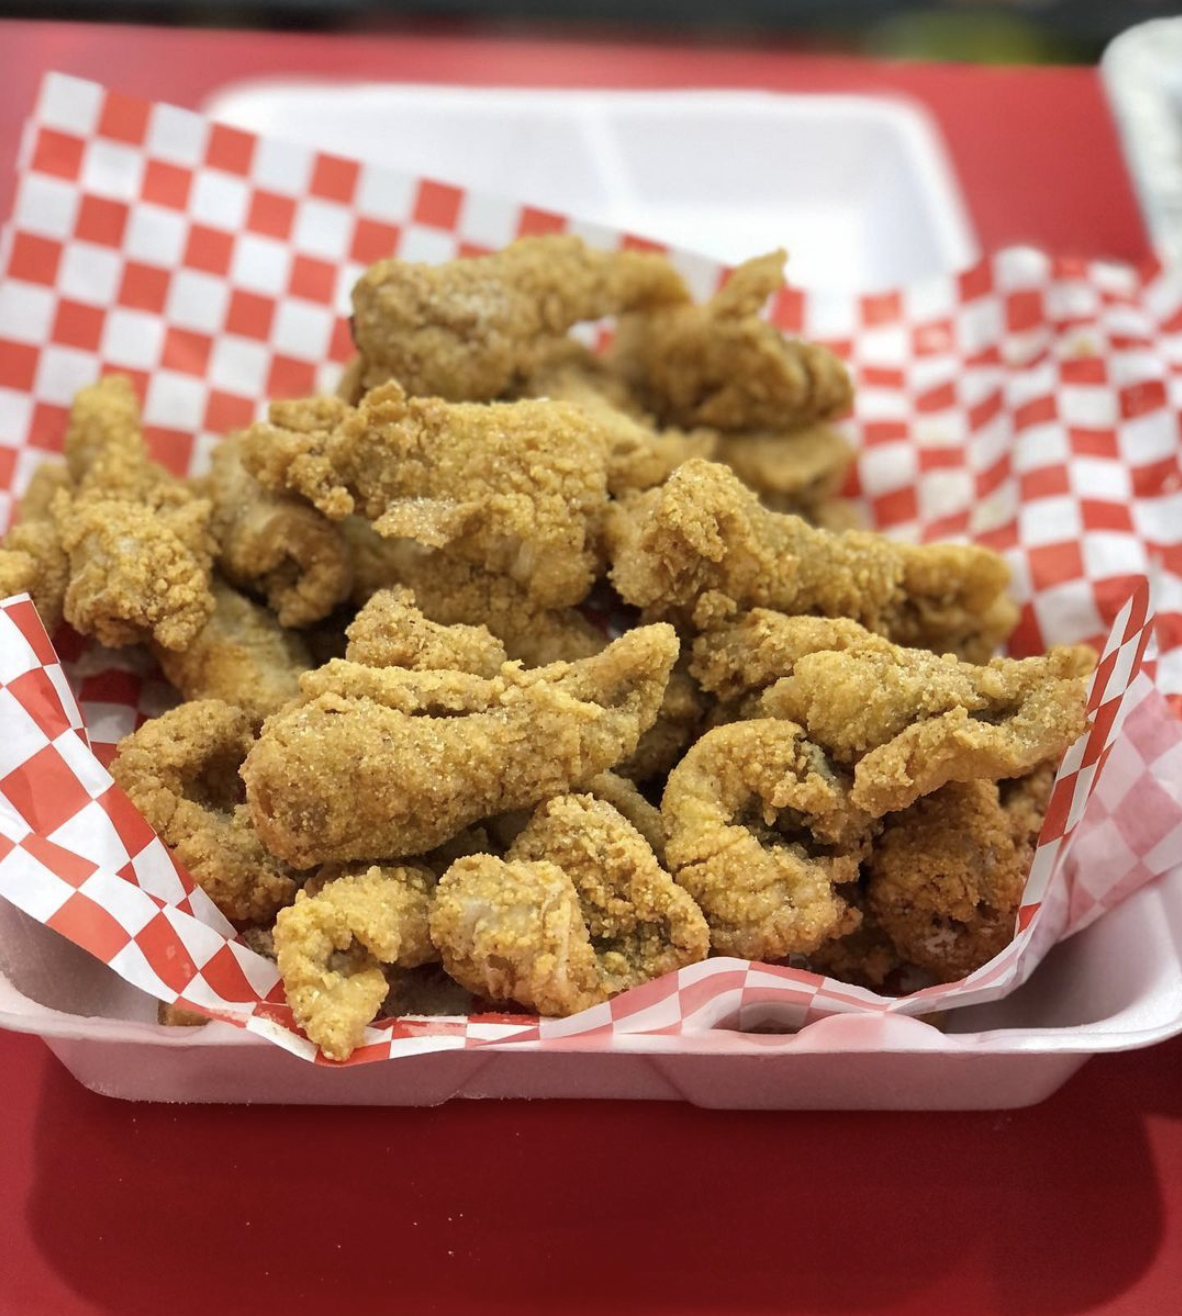 Captain Sam's Fish and Chicken Opening Fourth Location This Summer